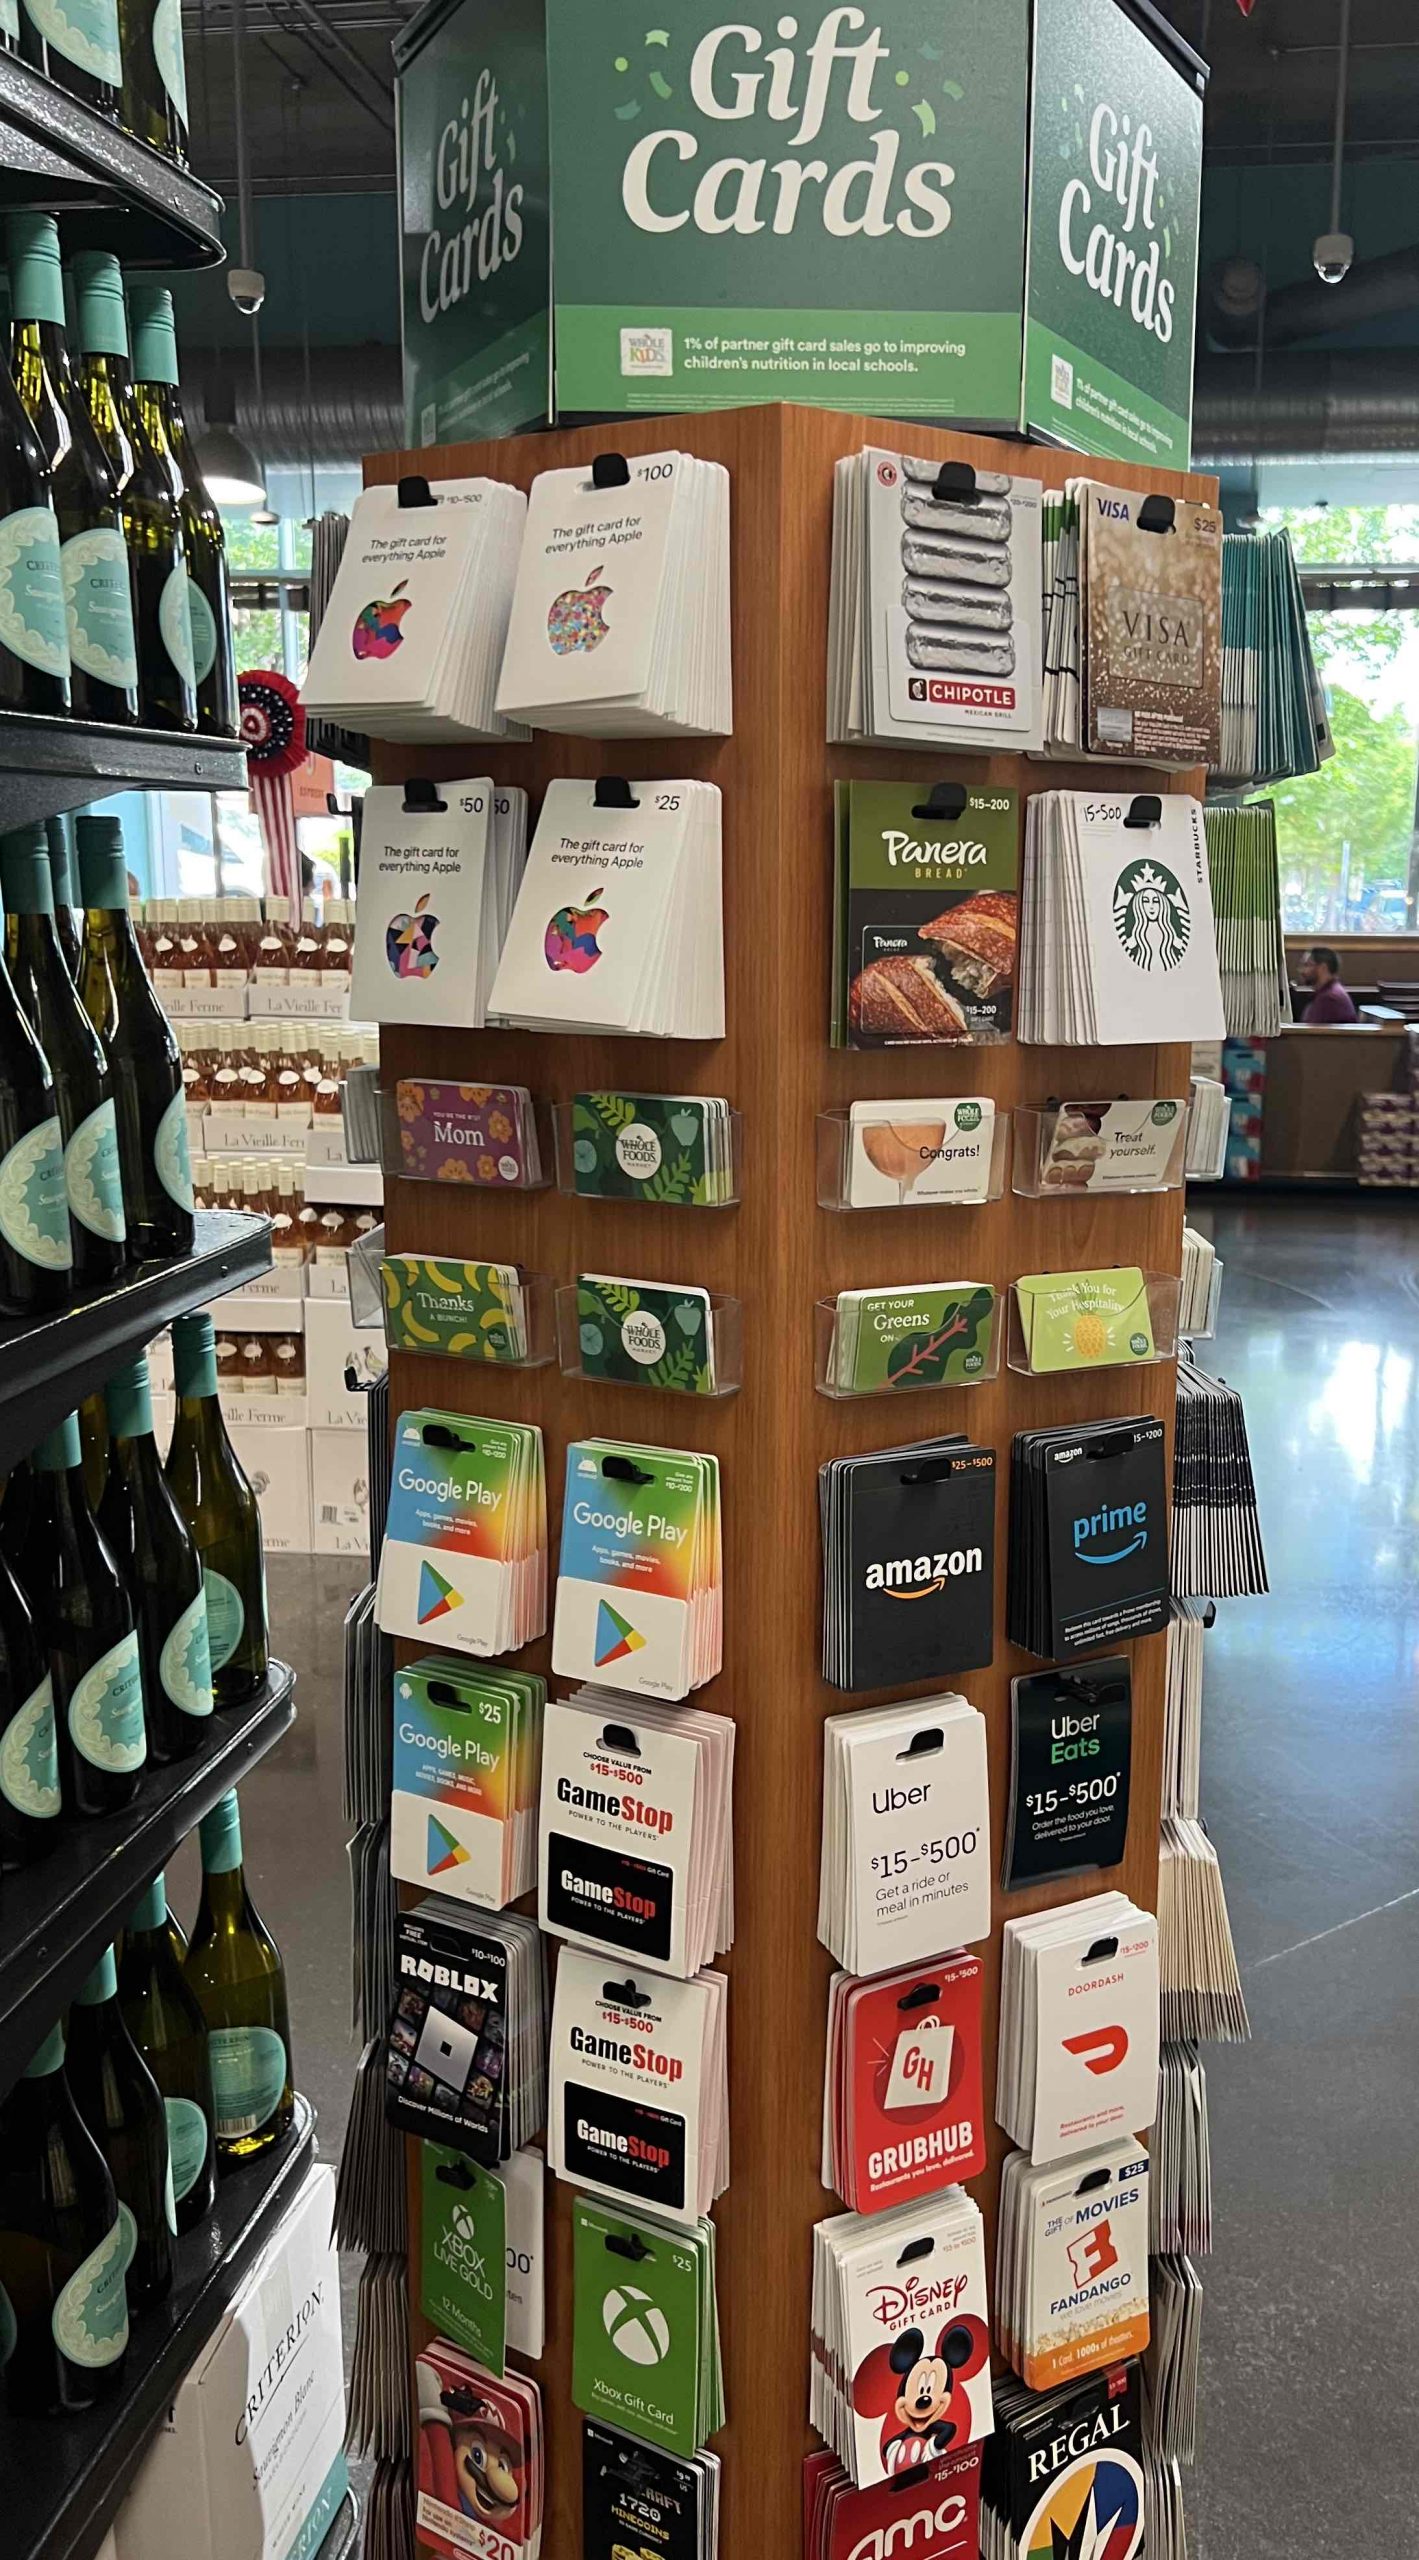 Can Amazon Gift Cards Be Used at Whole Foods?